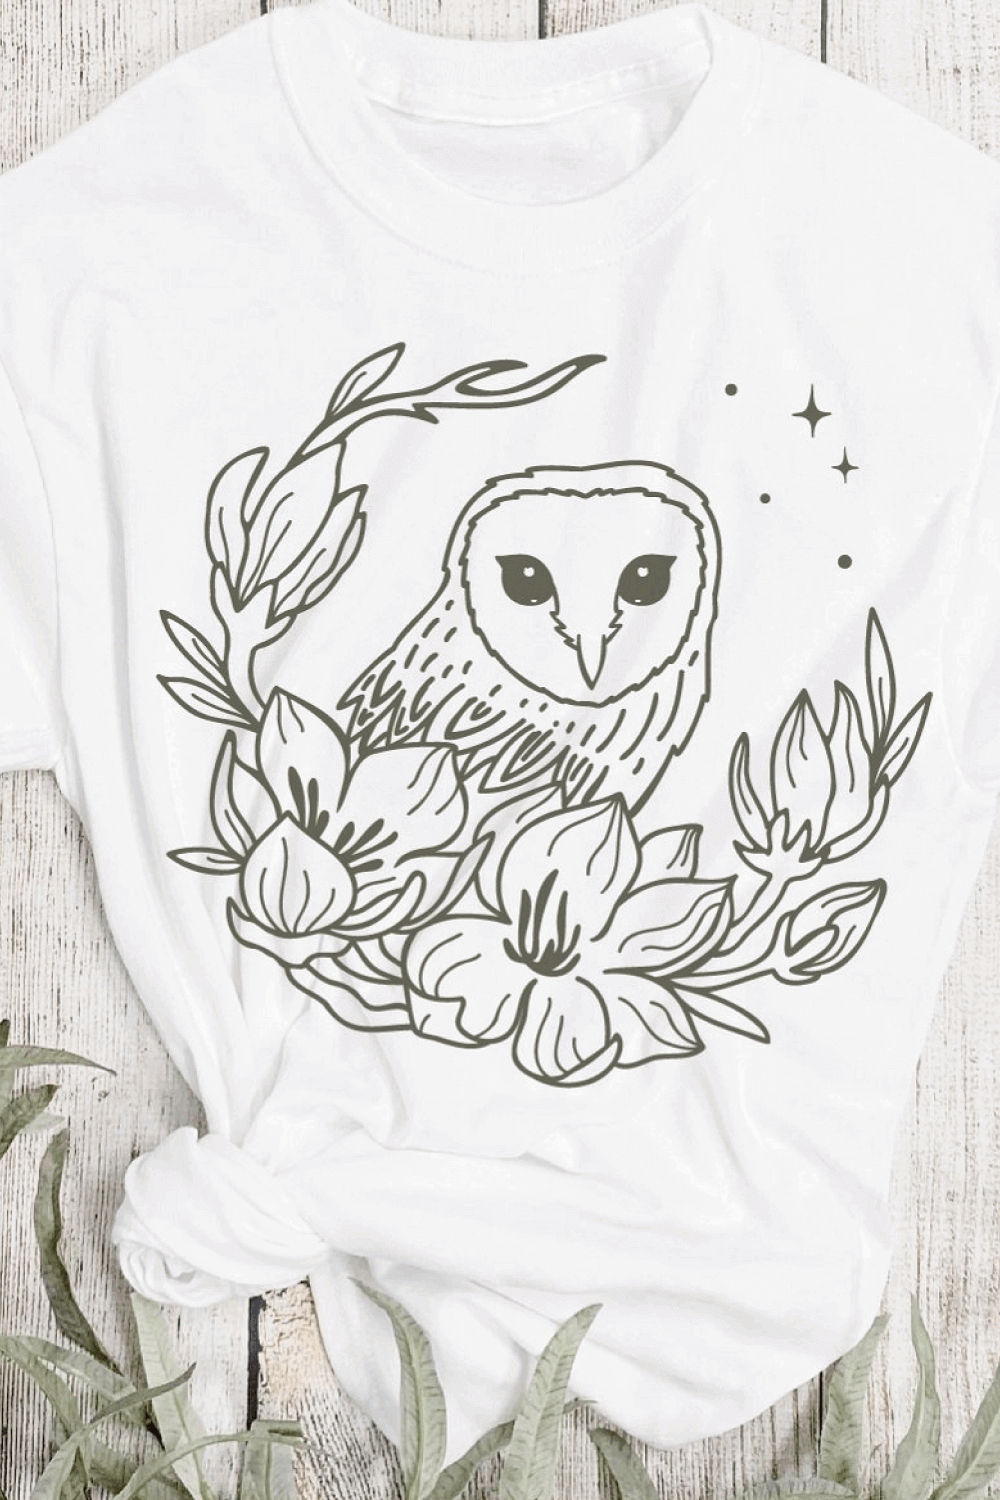 Boho Owl with Flowers SVG on the T-shirt.